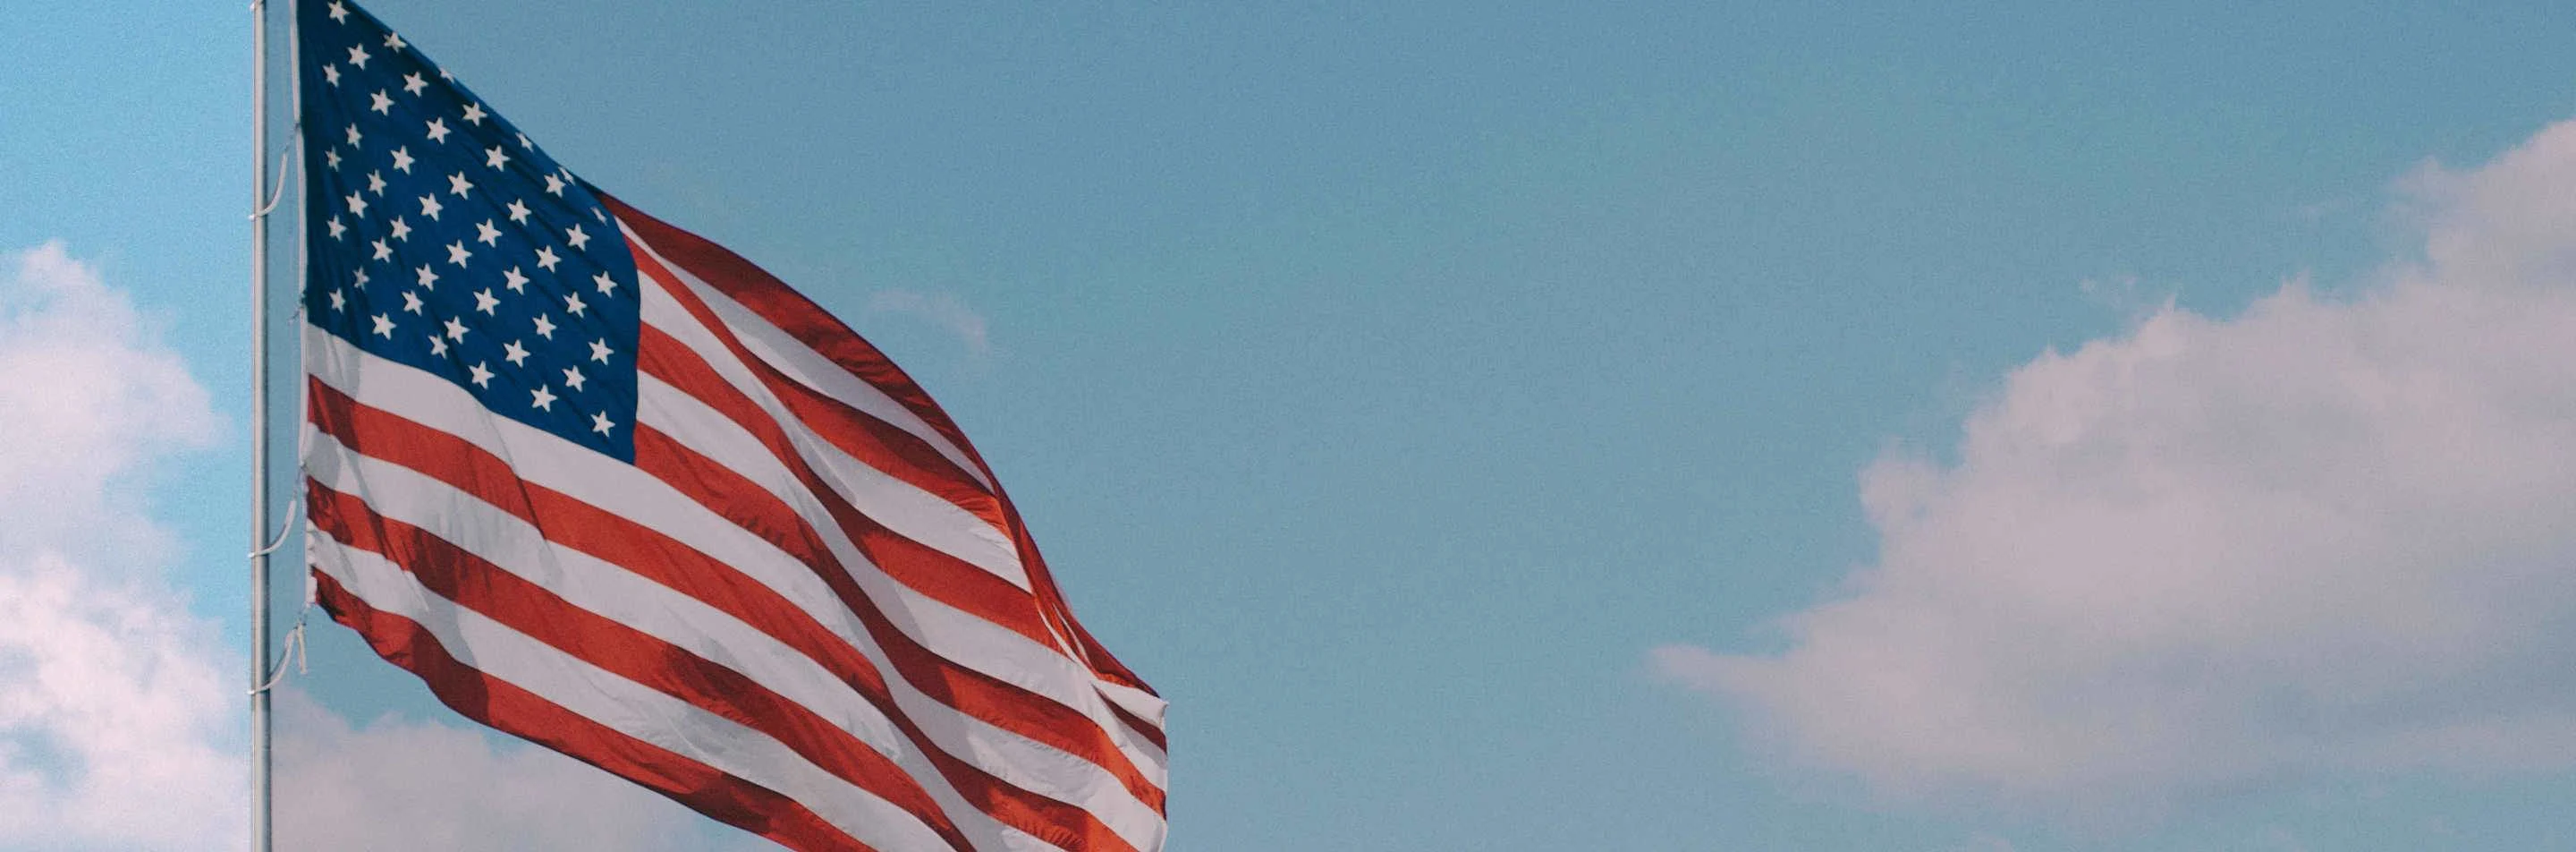 background image of American flag in the sky background